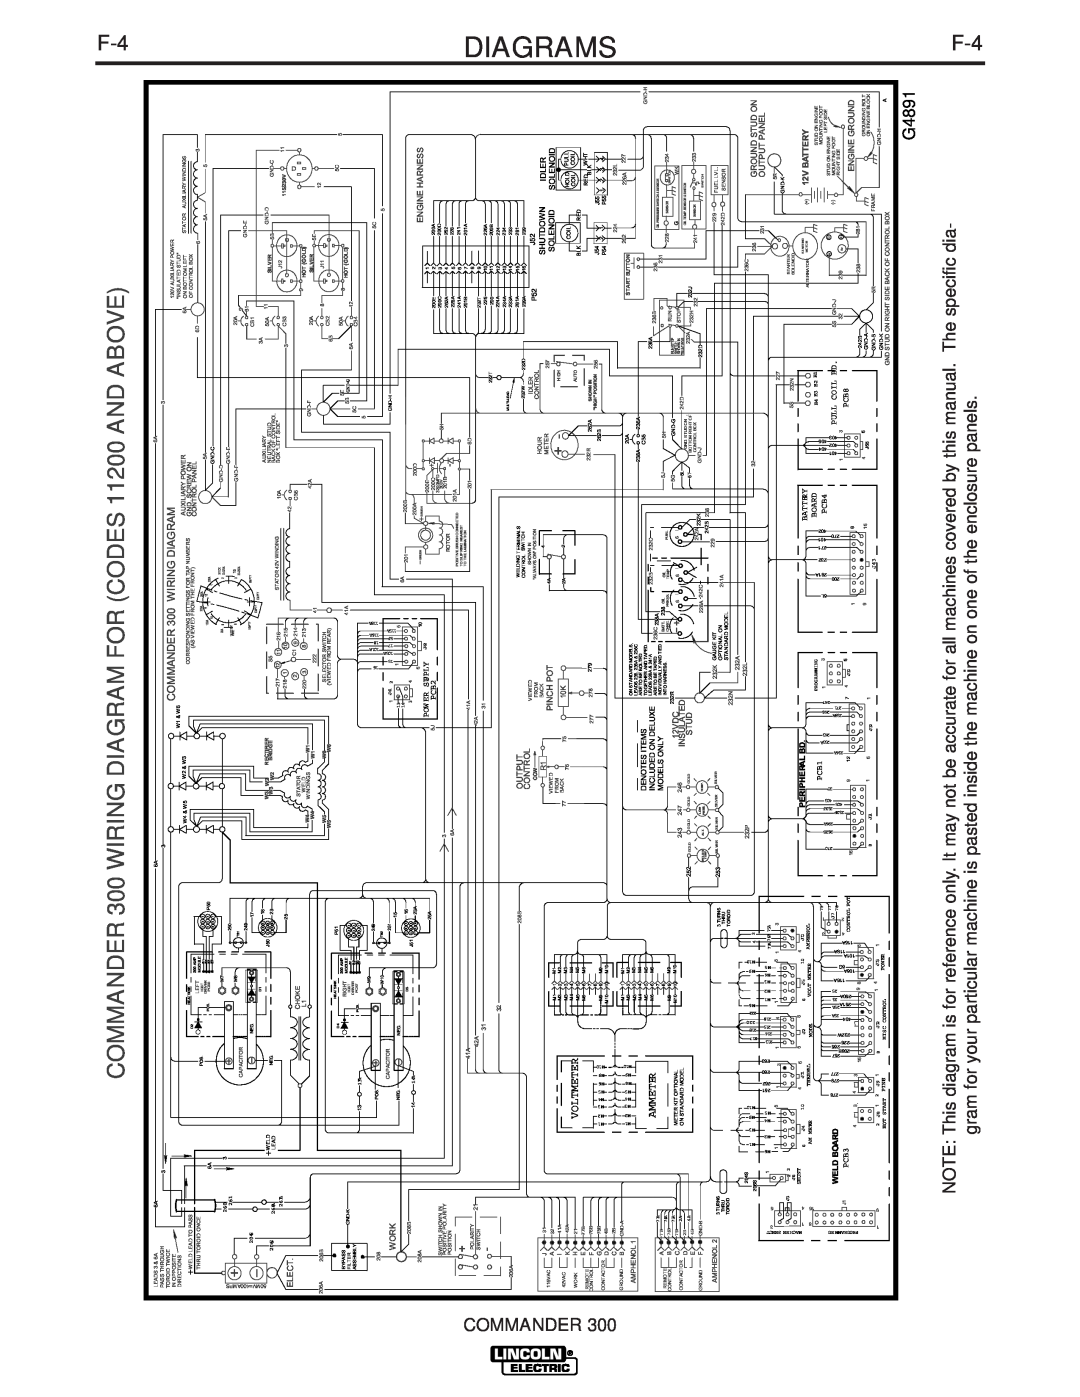 Lincoln Electric IM700-D Diagrams, COMMANDER 300 WIRING DIAGRAM FOR CODES 11200 AND ABOVE, Commander, G4891, Voltmeter 